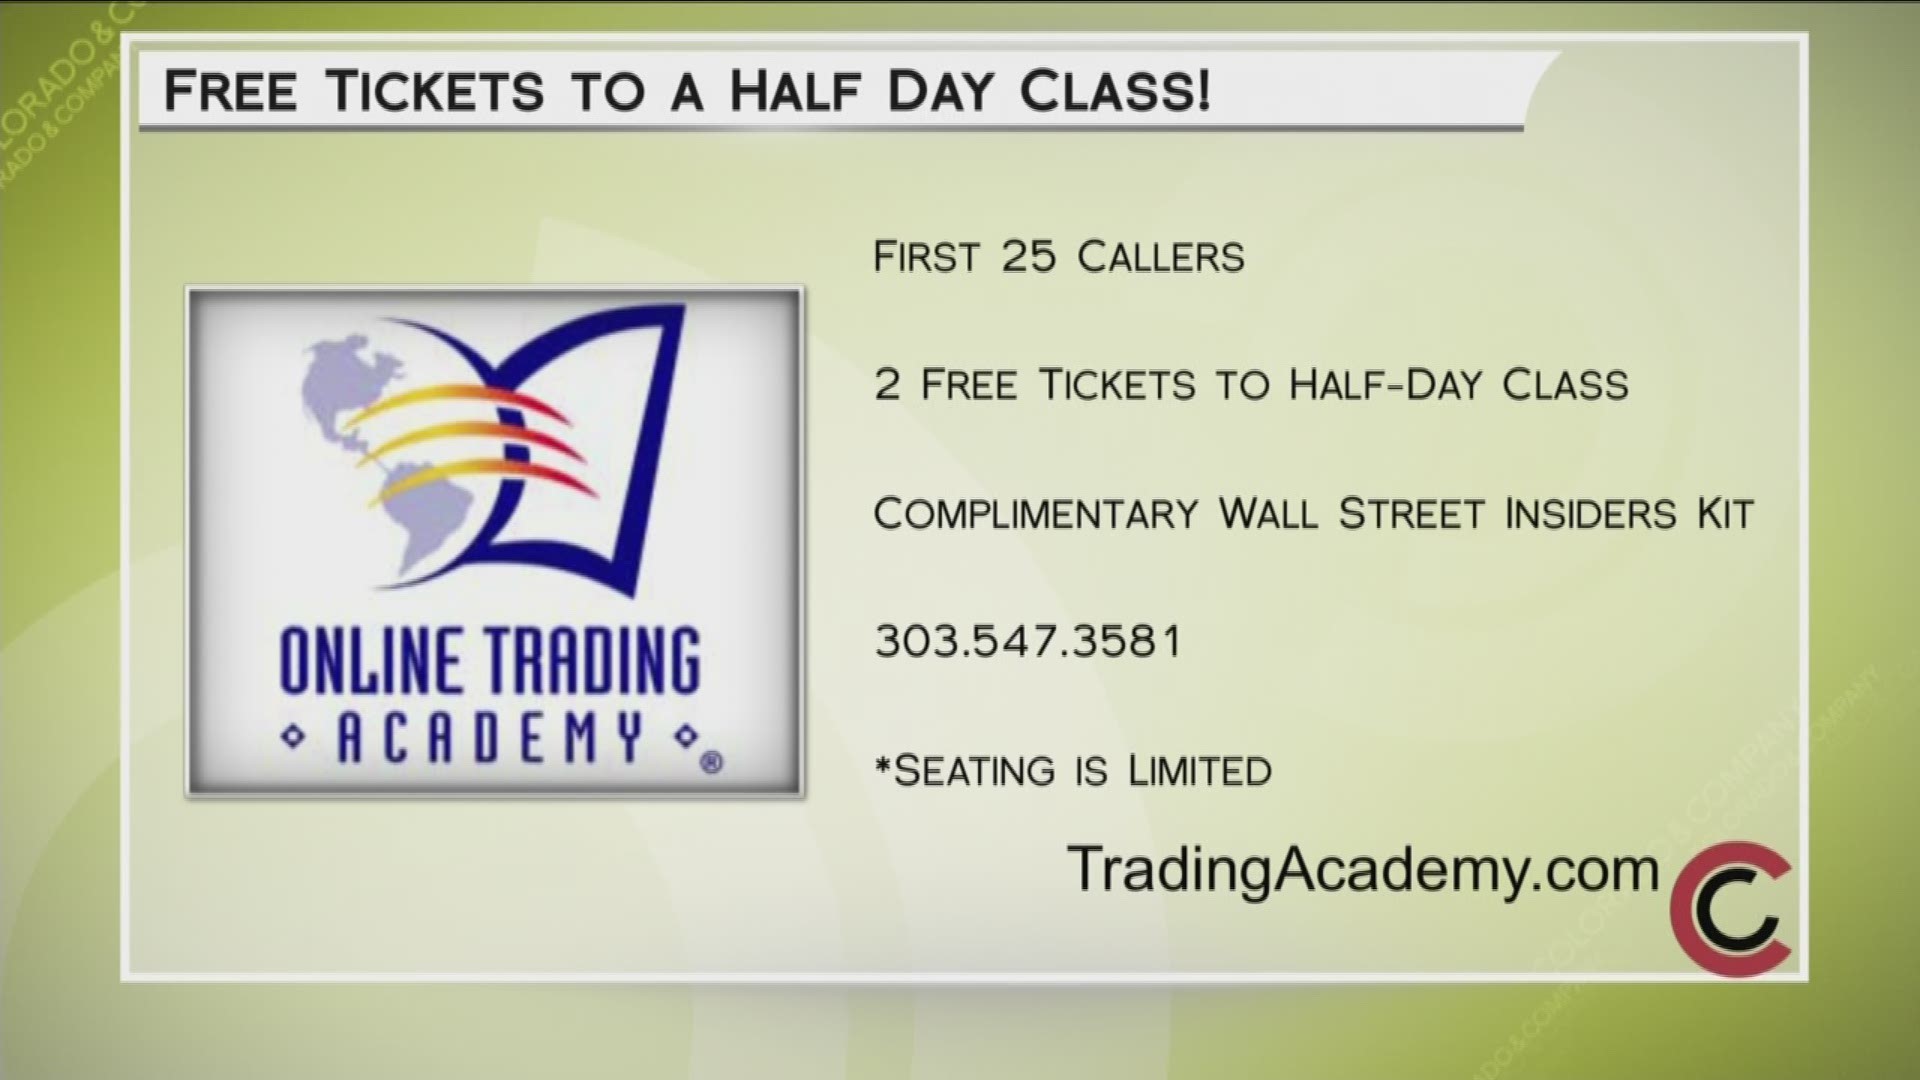 Learn how to trade and invest like the pros at Online Trading Academy. The first 25 callers will receive two free tickets to a half-day class, valued at $500. Call 303.547.3581, or visit www.TradingAcademy.com for more information 
THIS INTERVIEW HAS COMMERCIAL CONTENT. PRODUCTS AND SERVICES FEATURED APPEAR AS PAID ADVERTISING.